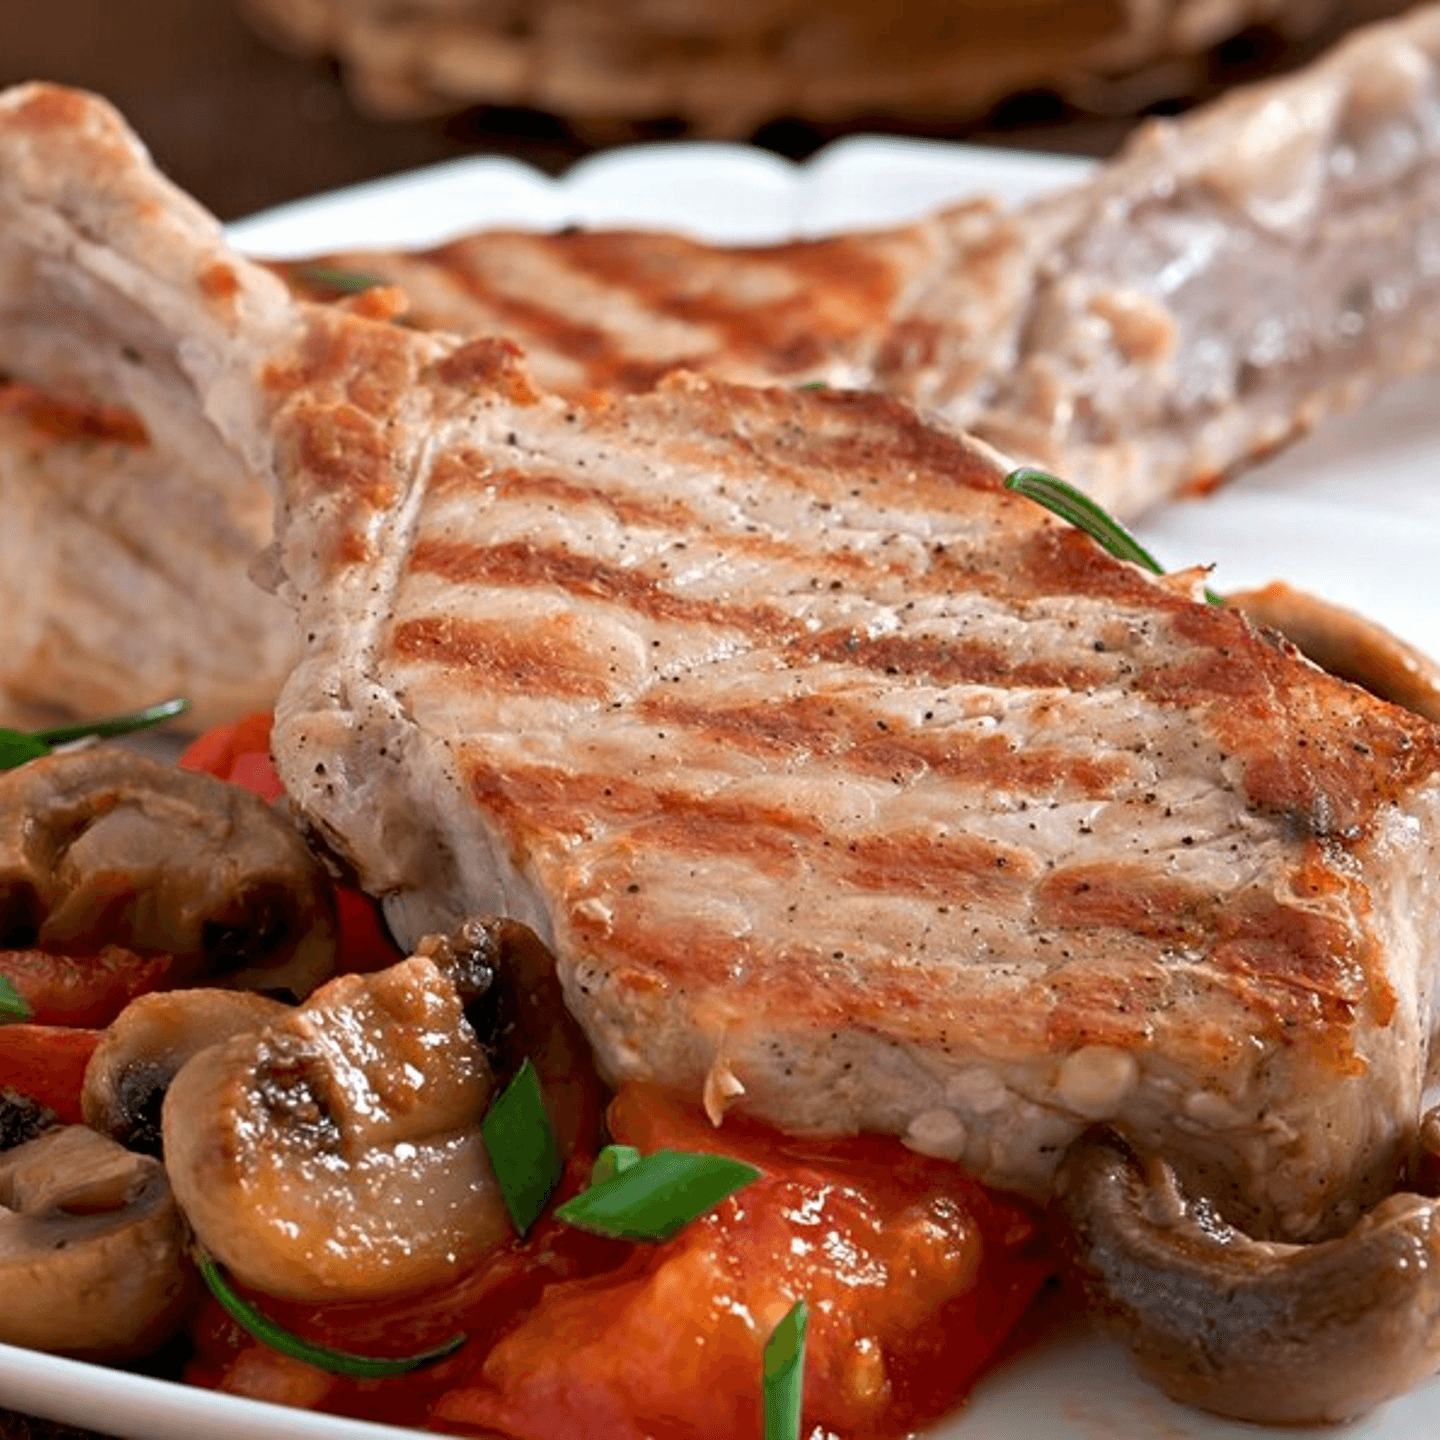 Delight in Our Delectable Pork Chop Creations